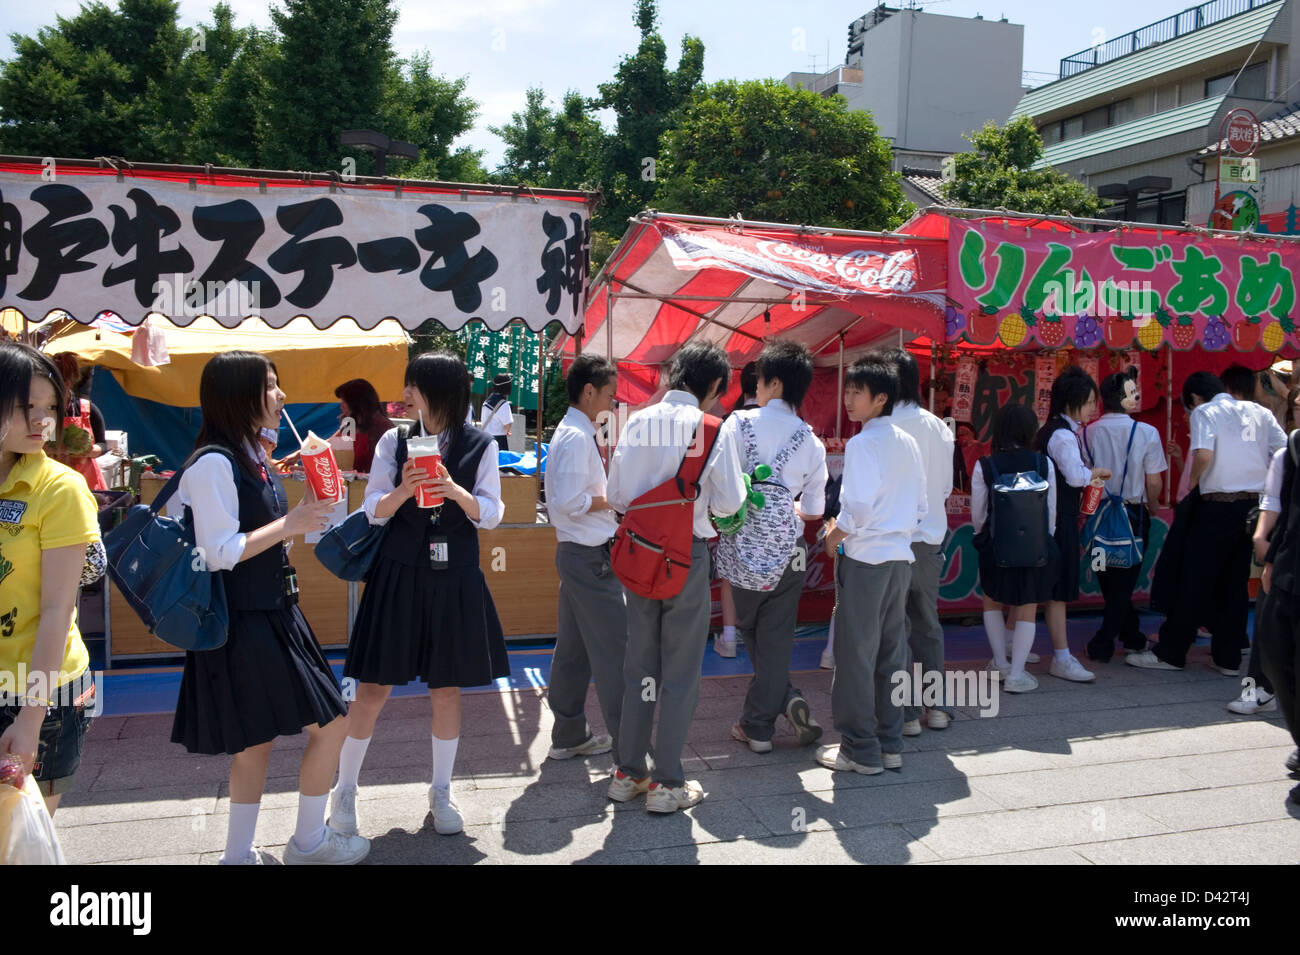 High school girls and boys in uniform enjoy festive atmosphere while strolling around roten stands featuring games and snacks Stock Photo